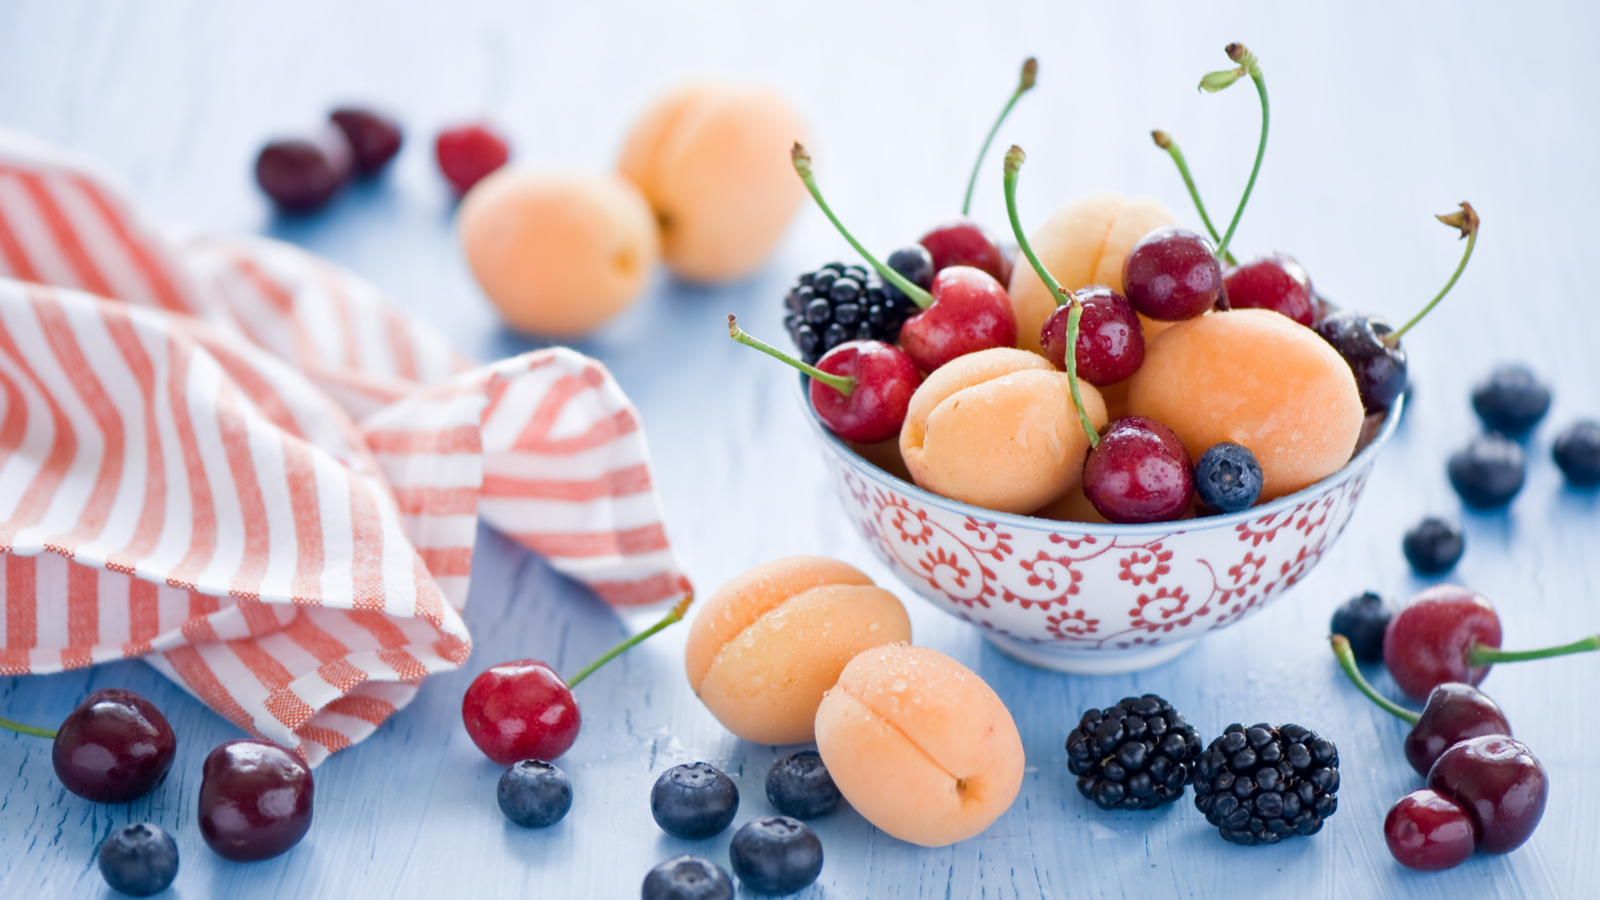 Das Plate Of Fruits And Berries Wallpaper 1600x900